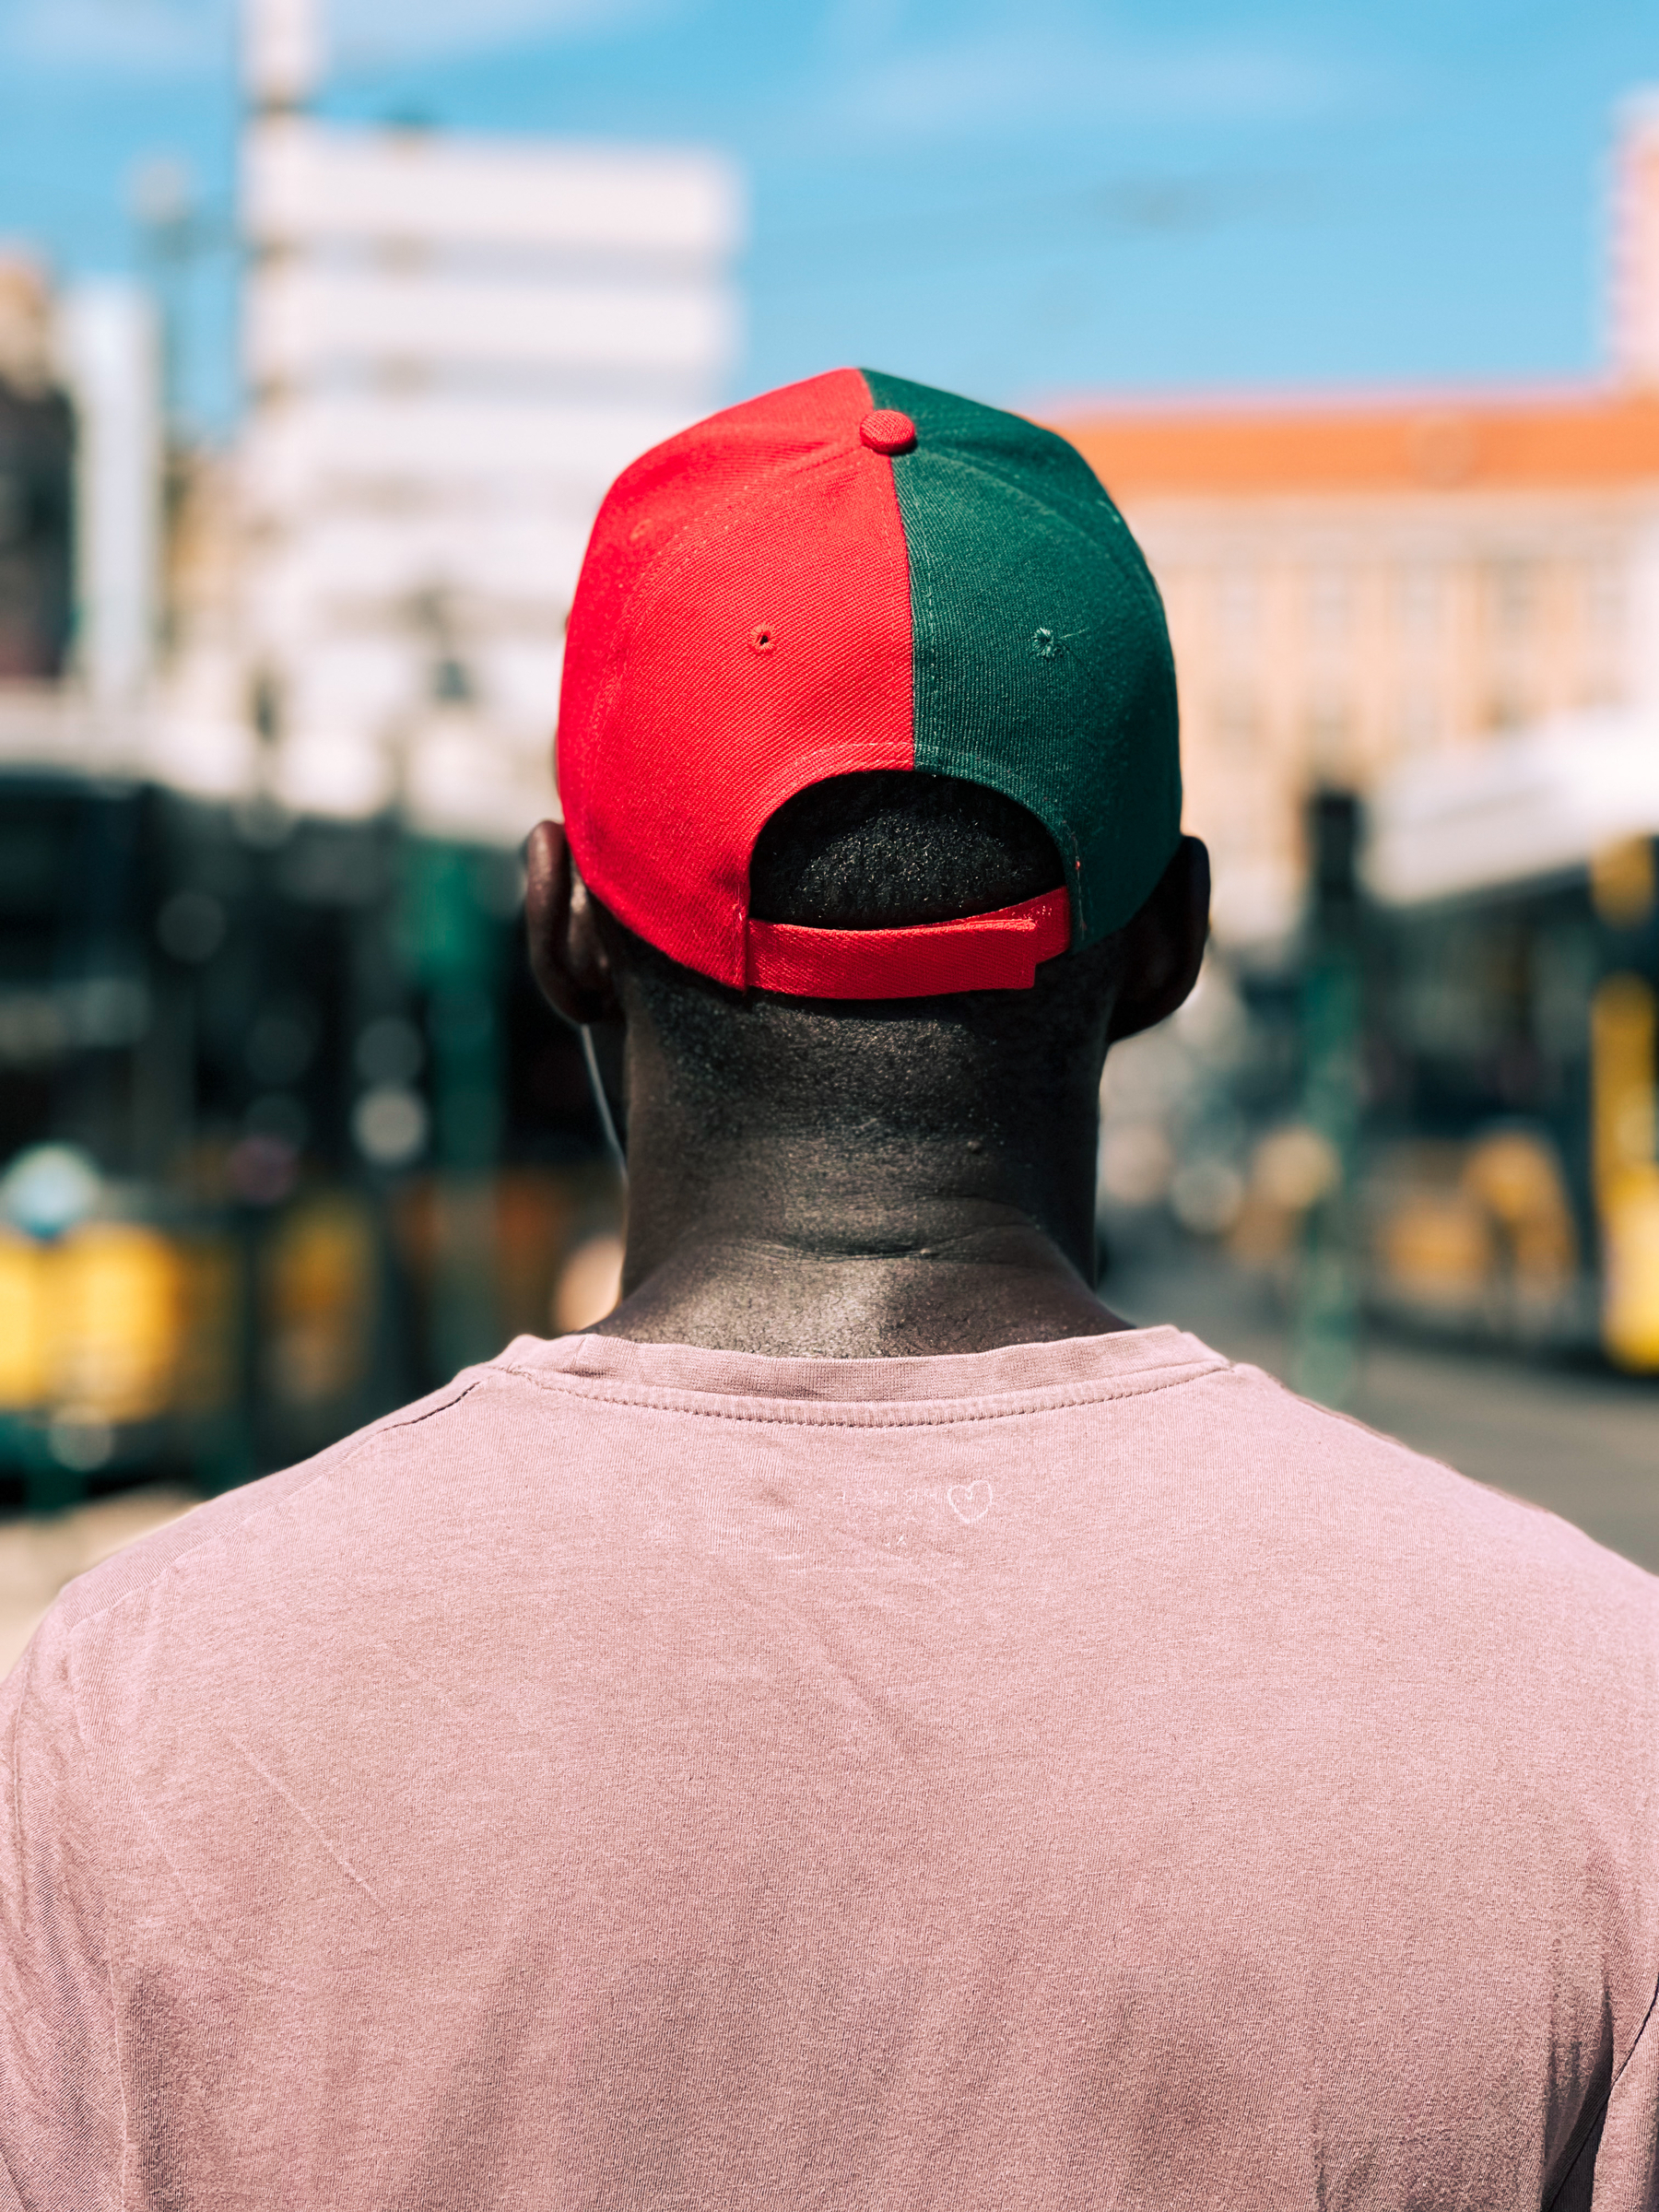 A man shot from the back, wearing a cap. Half the cap is red, other half green. The Portuguese flag. 